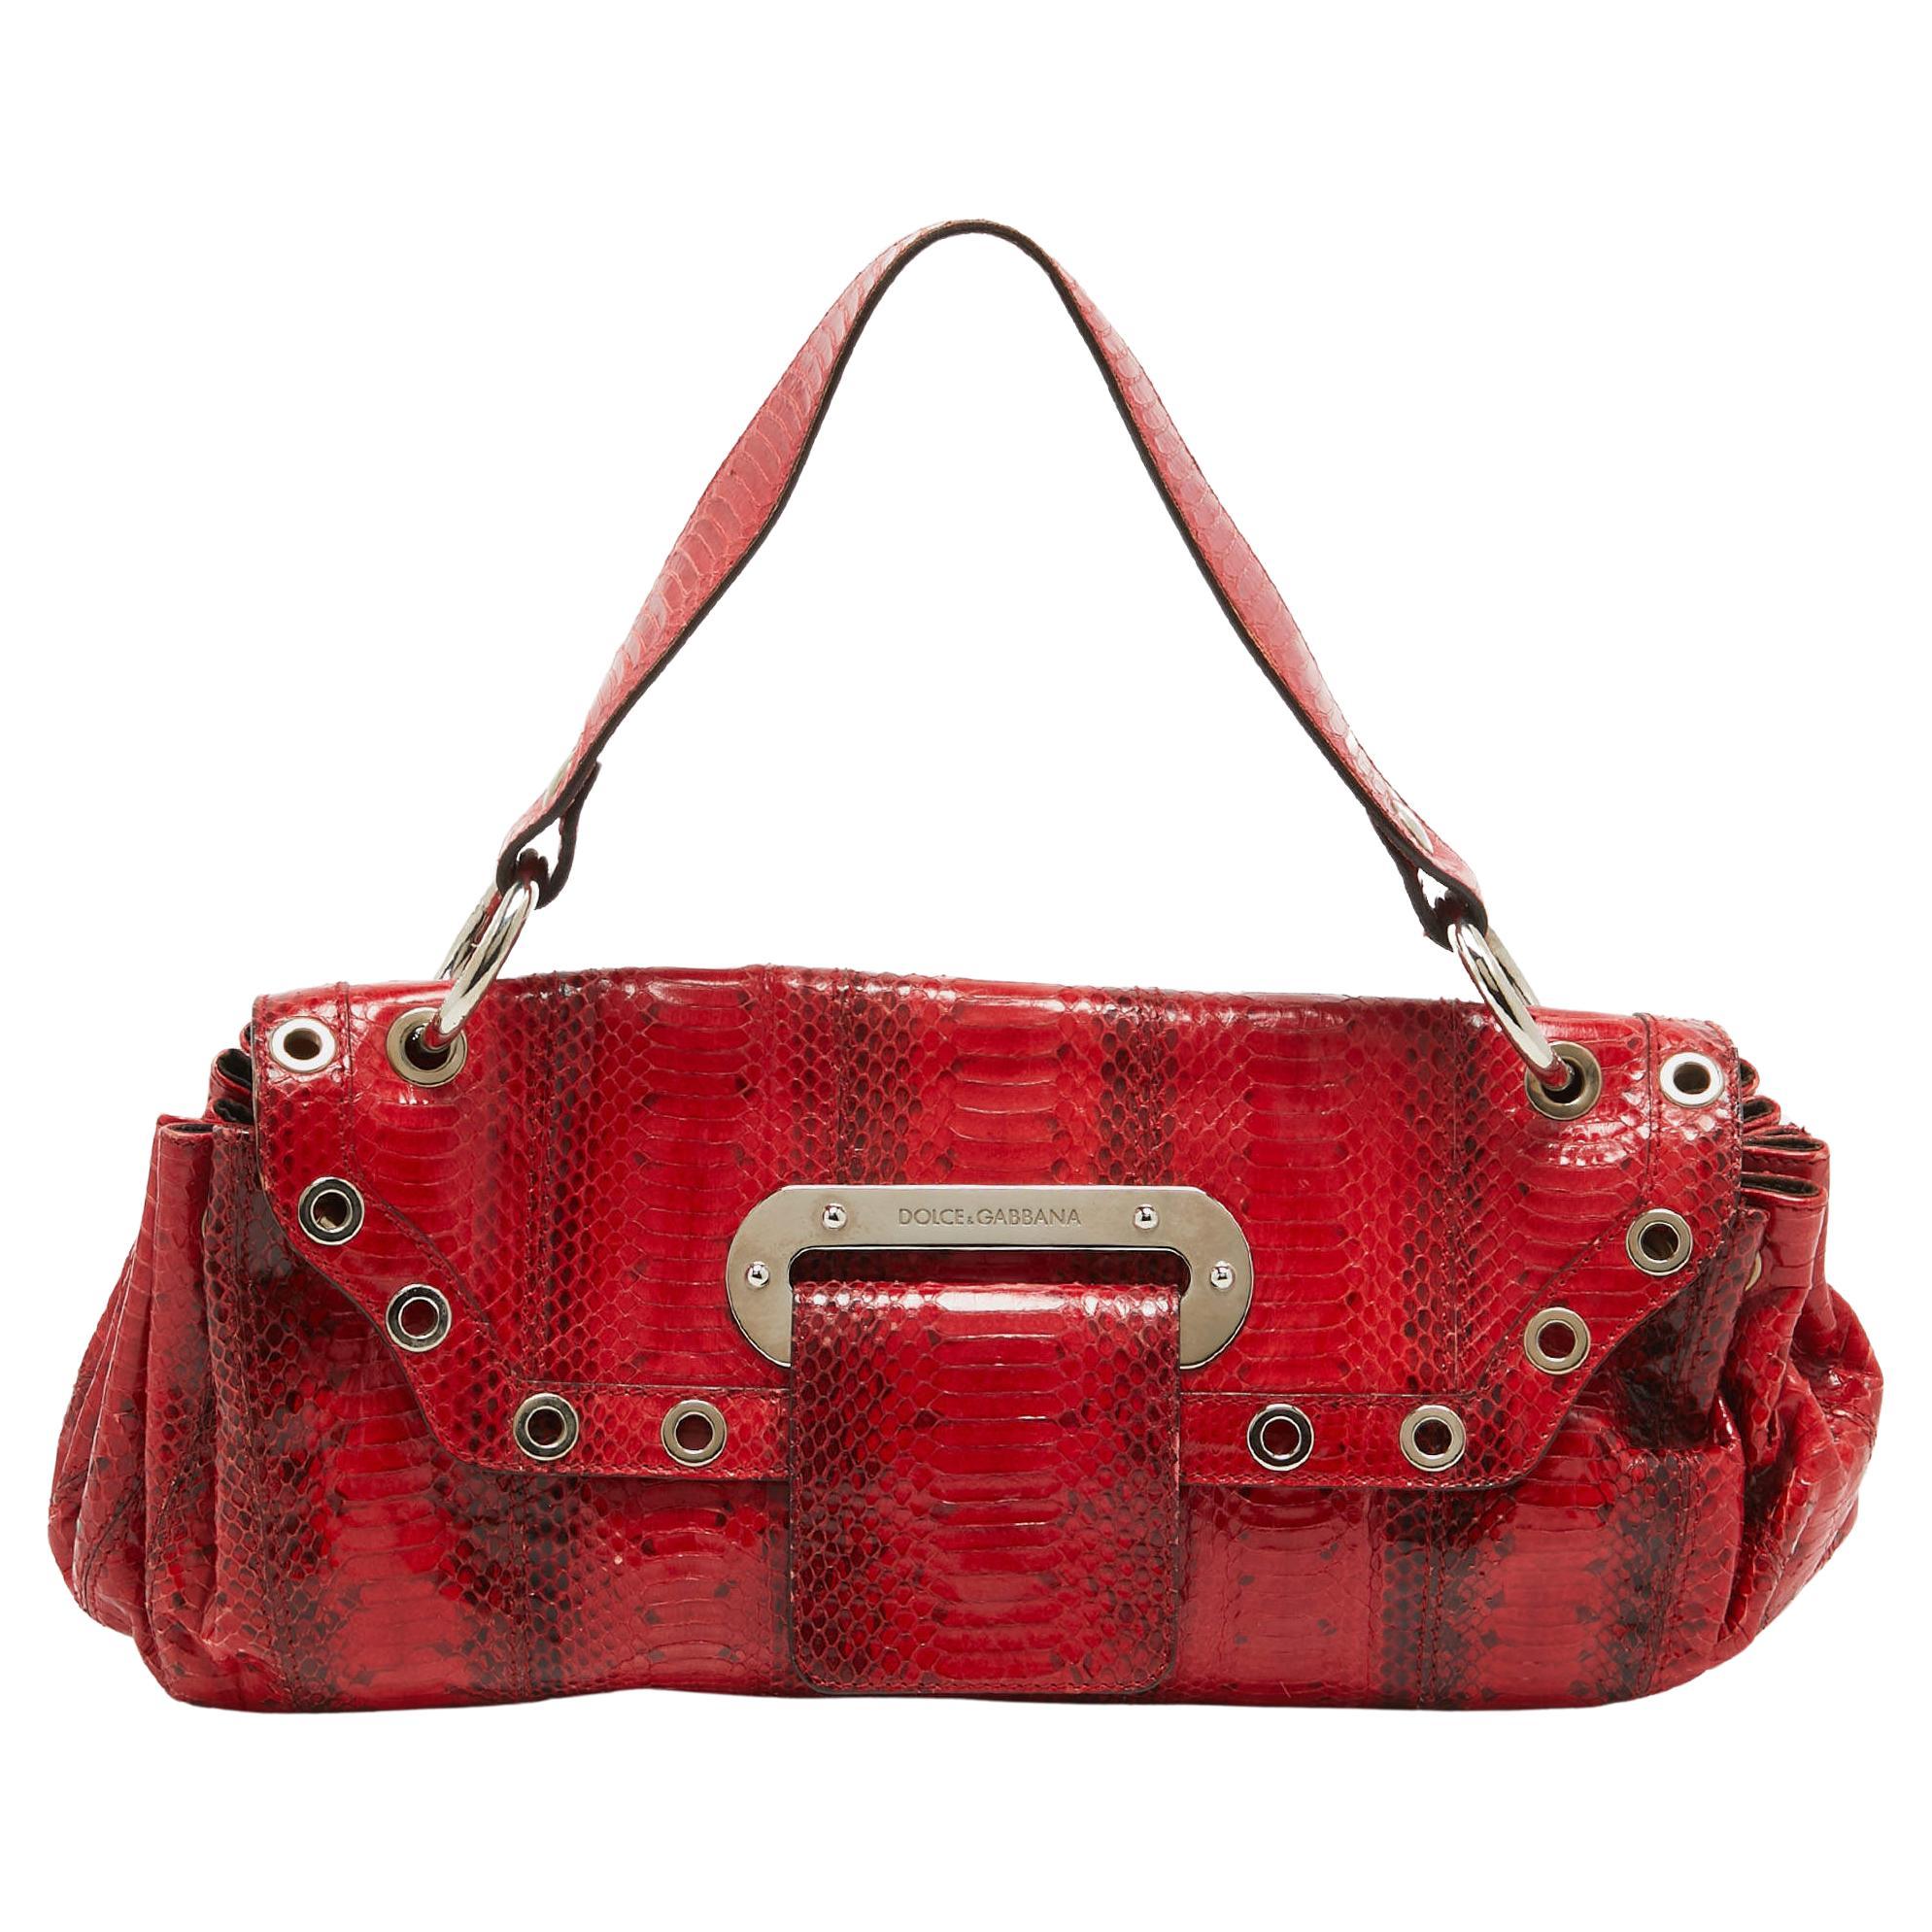 Dolce & Gabbana Red Watersnake Leather Satchel For Sale